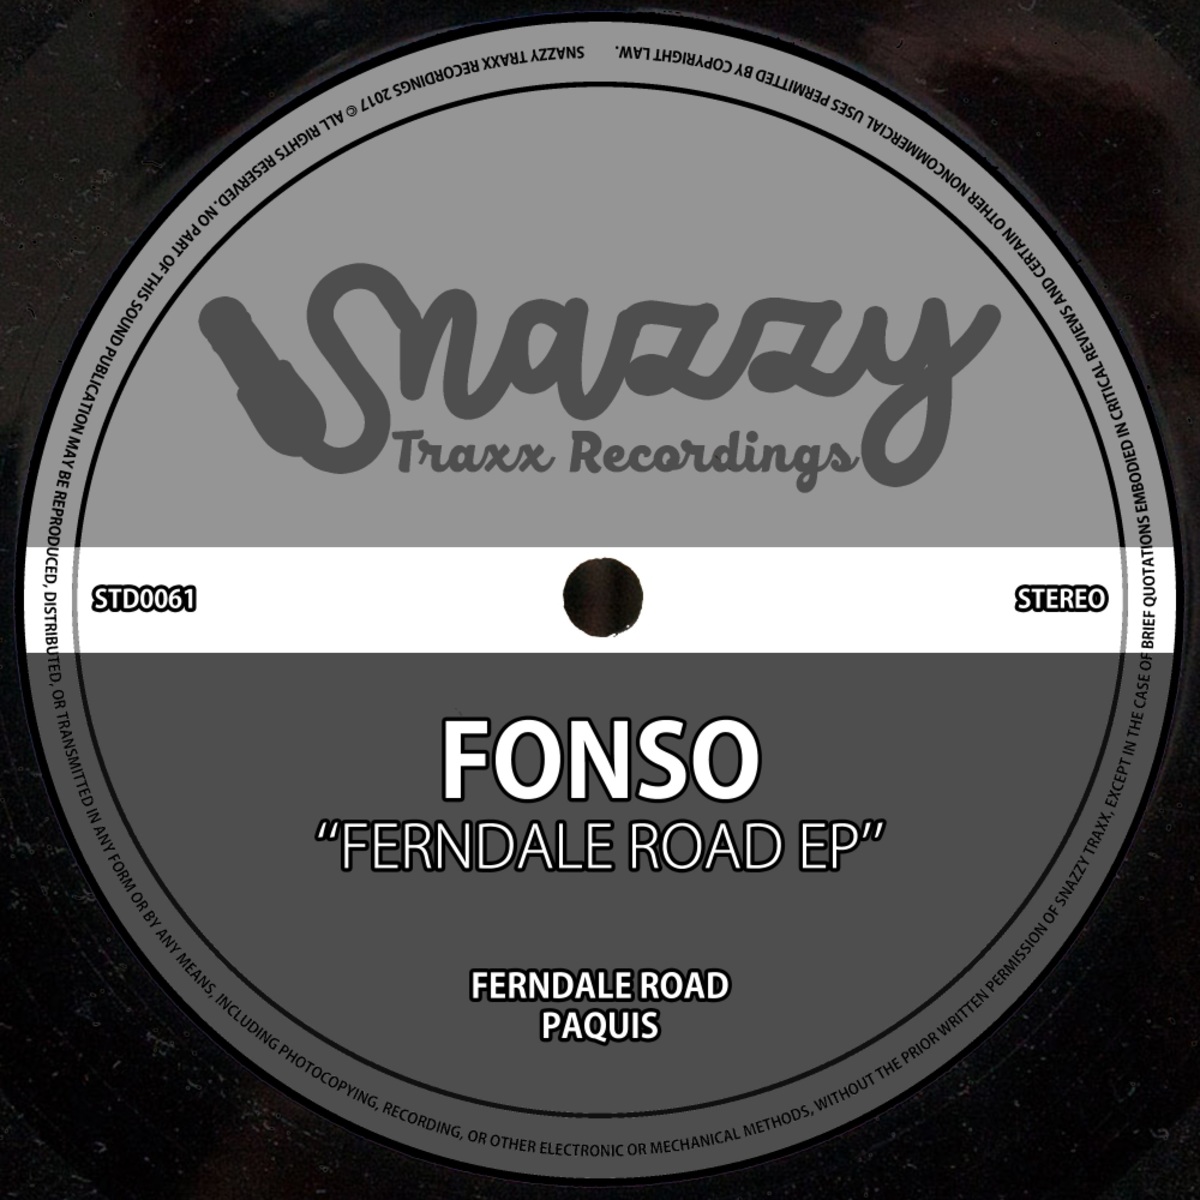 Fonso - Ferndale Road EP / Snazzy Traxx